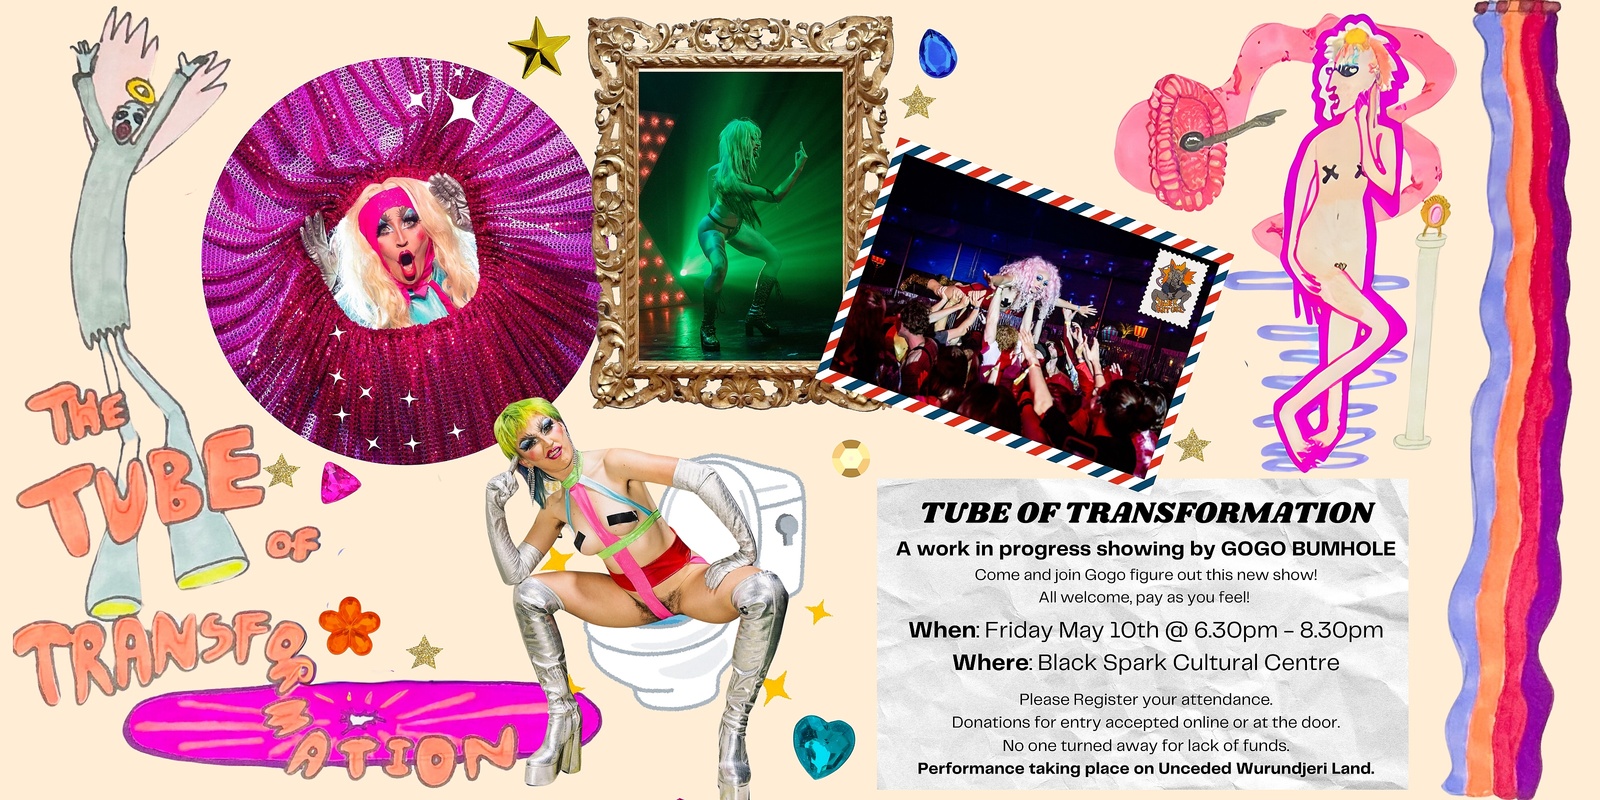 Banner image for TUBE OF TRANSFORMATION by GOGO BUMHOLE - A work in progress showing